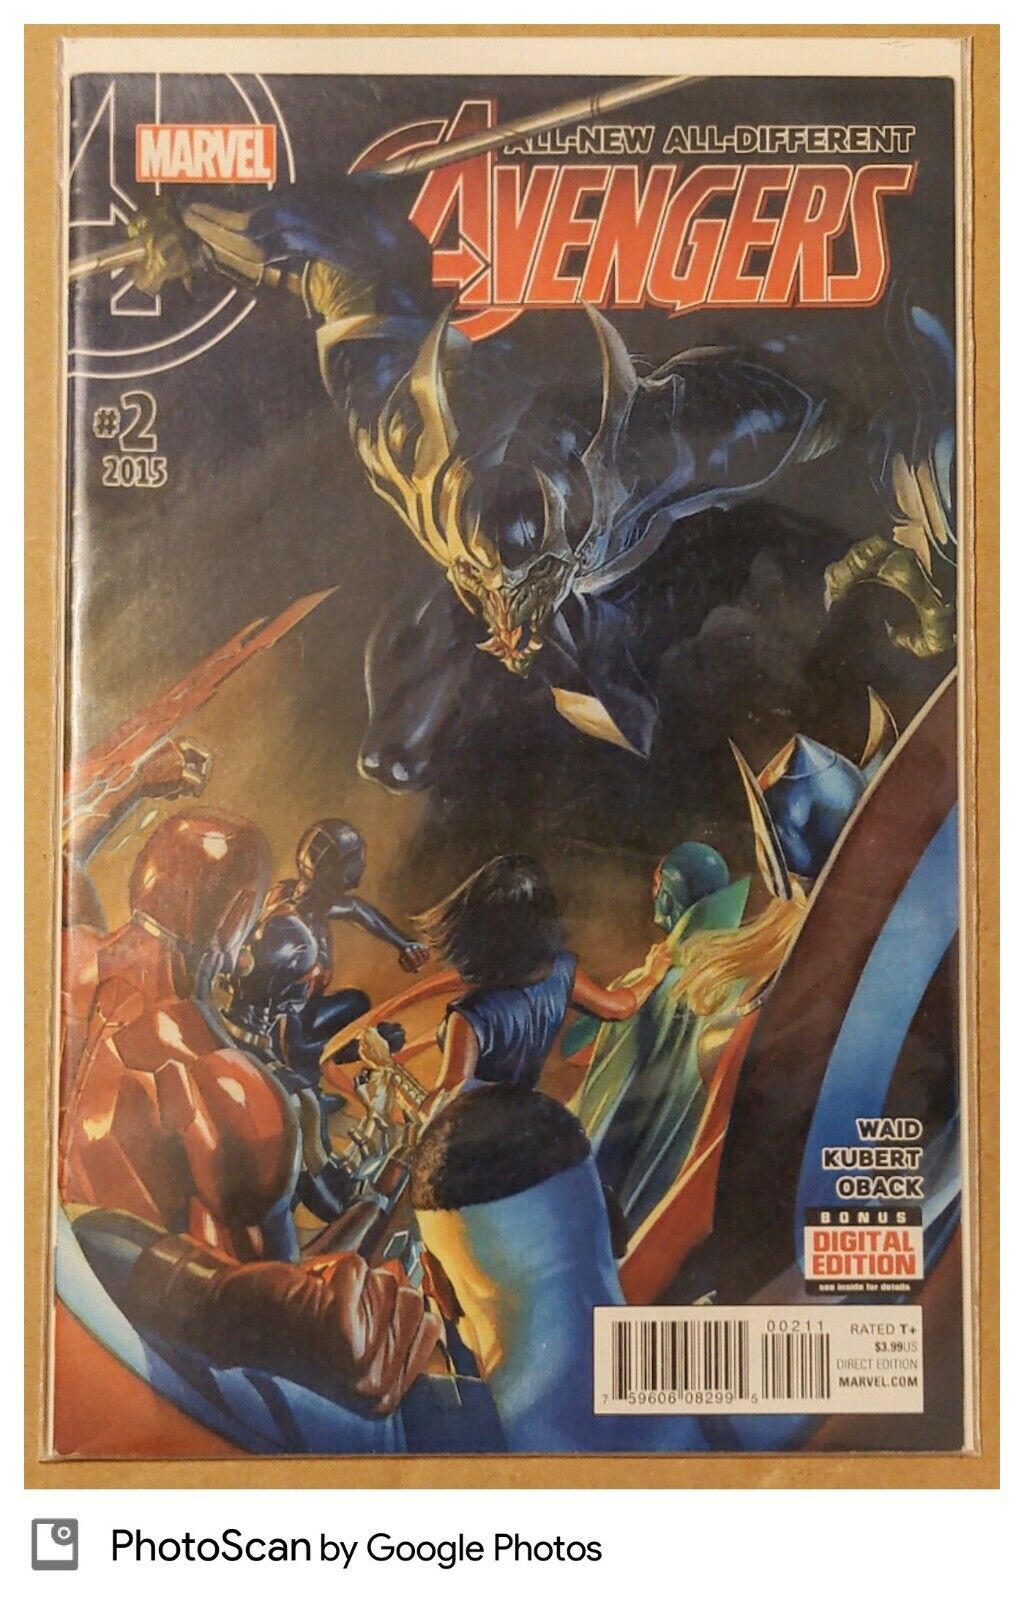 ALL-NEW ALL-DIFFERENT AVENGERS #2 (2015) MARVEL COMICS MS MARVEL ALEX ROSS COVER